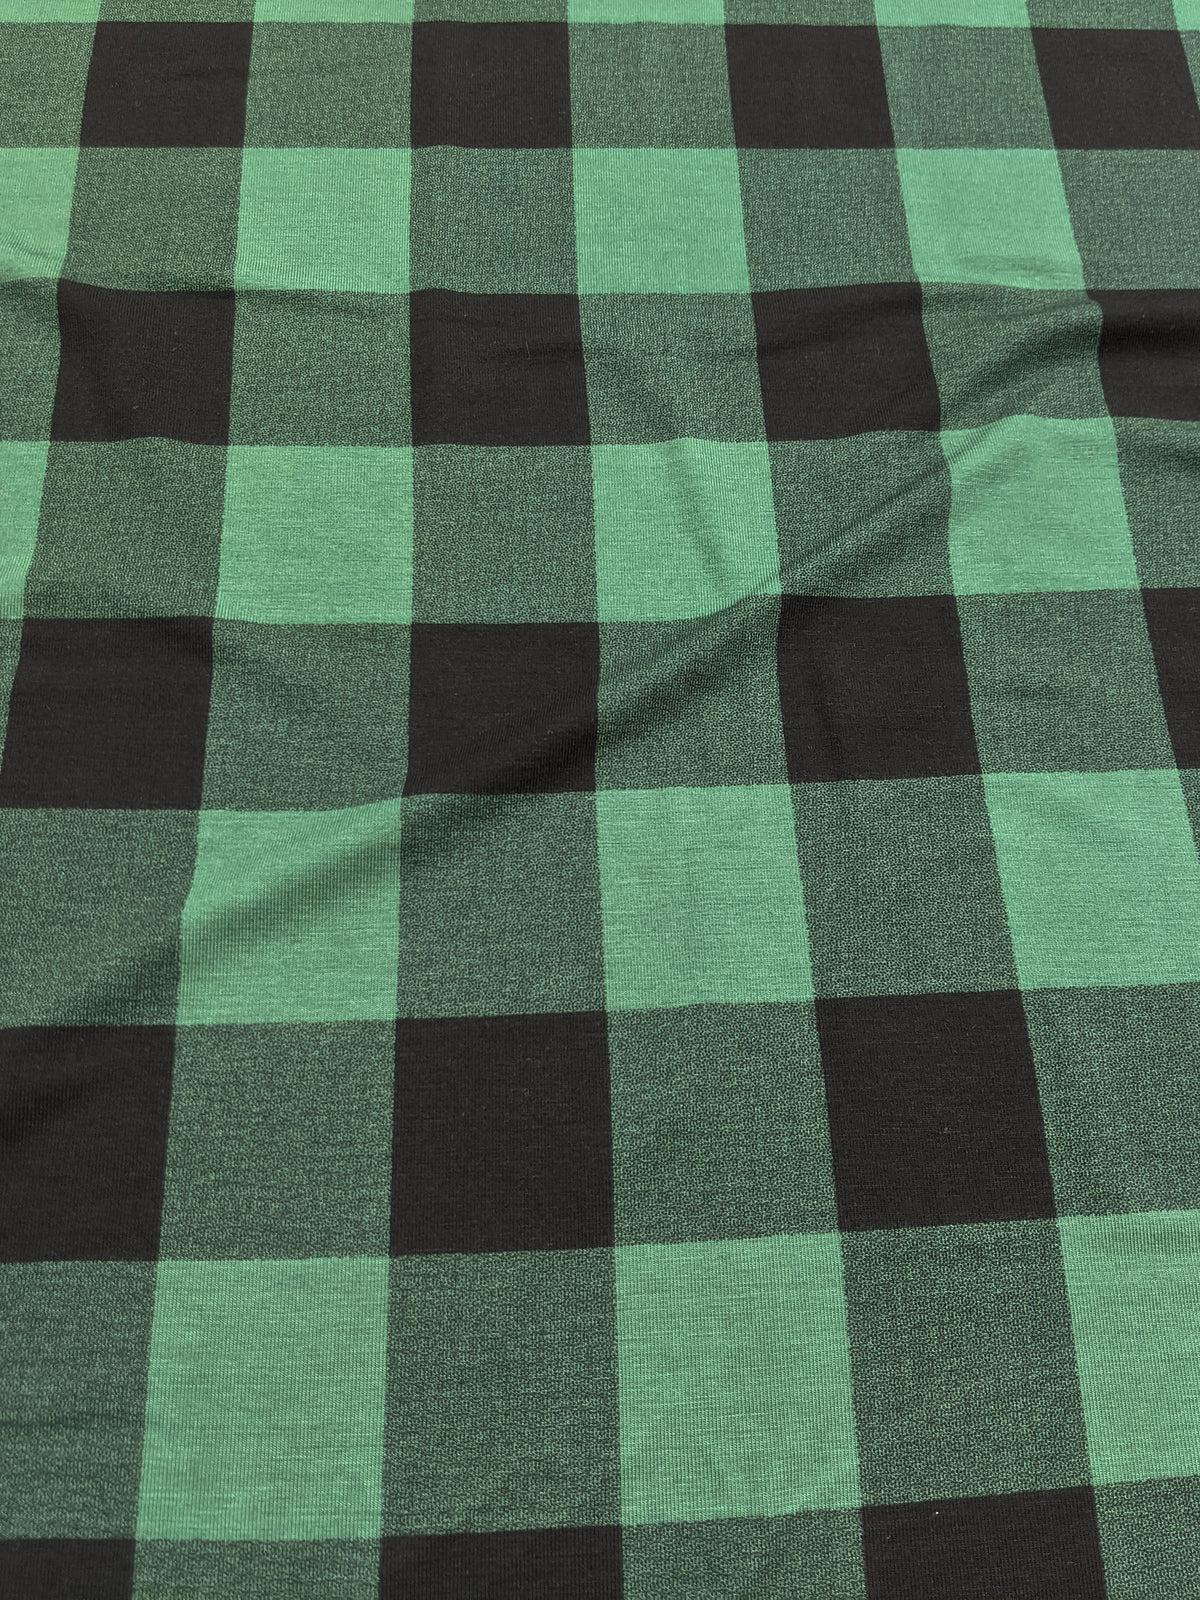 Remnant: Bamboo Jersey Knit - Green/Black Plaid (1 metre)